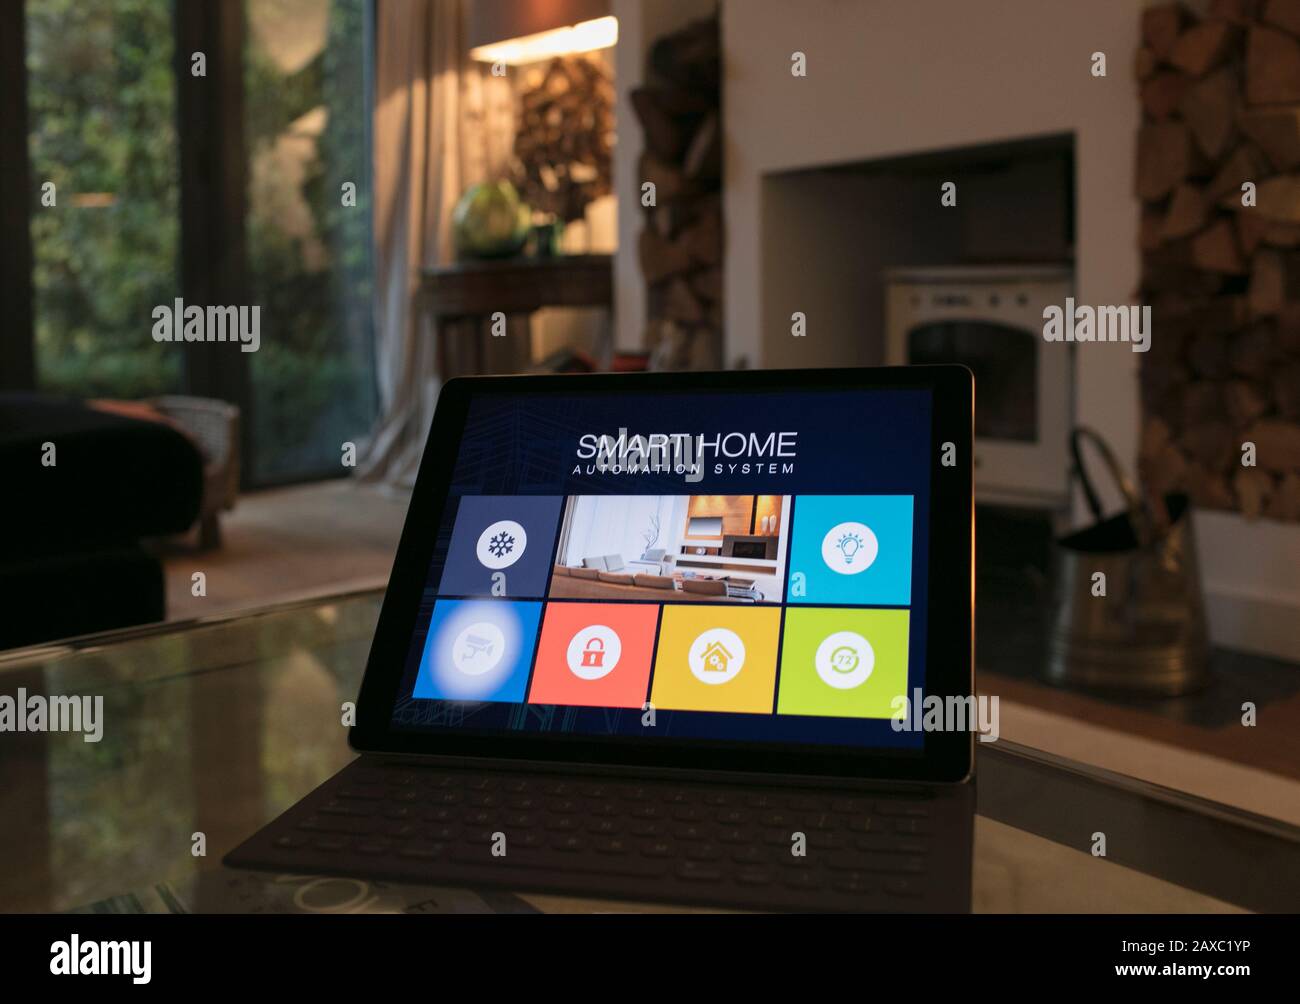 Smart home automation system on digital tablet in living room Stock Photo